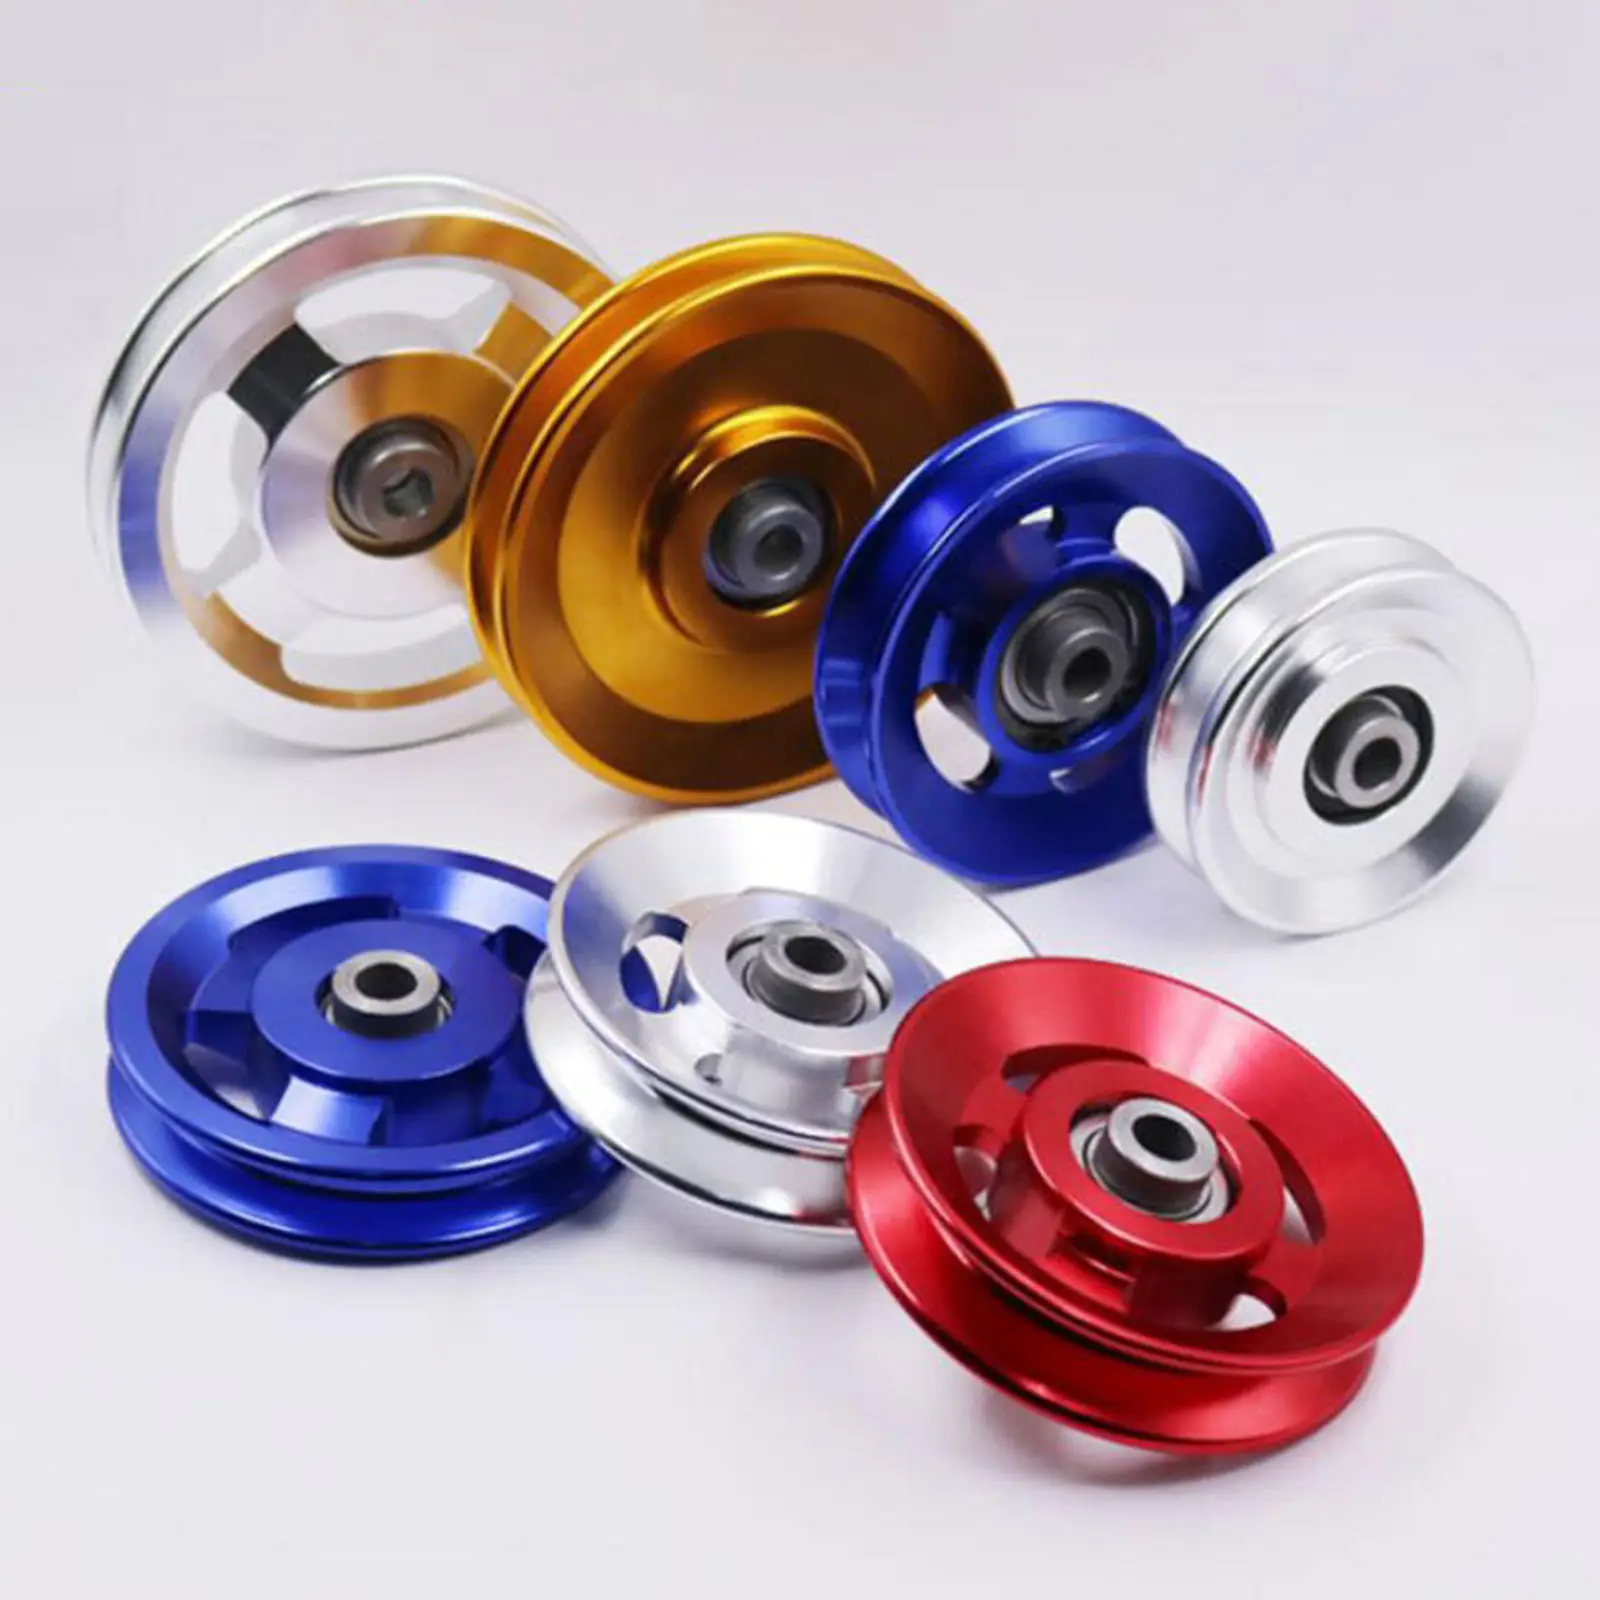 Bearing Pulley Wheel Cable Gym Fitness Equipment Part Universal